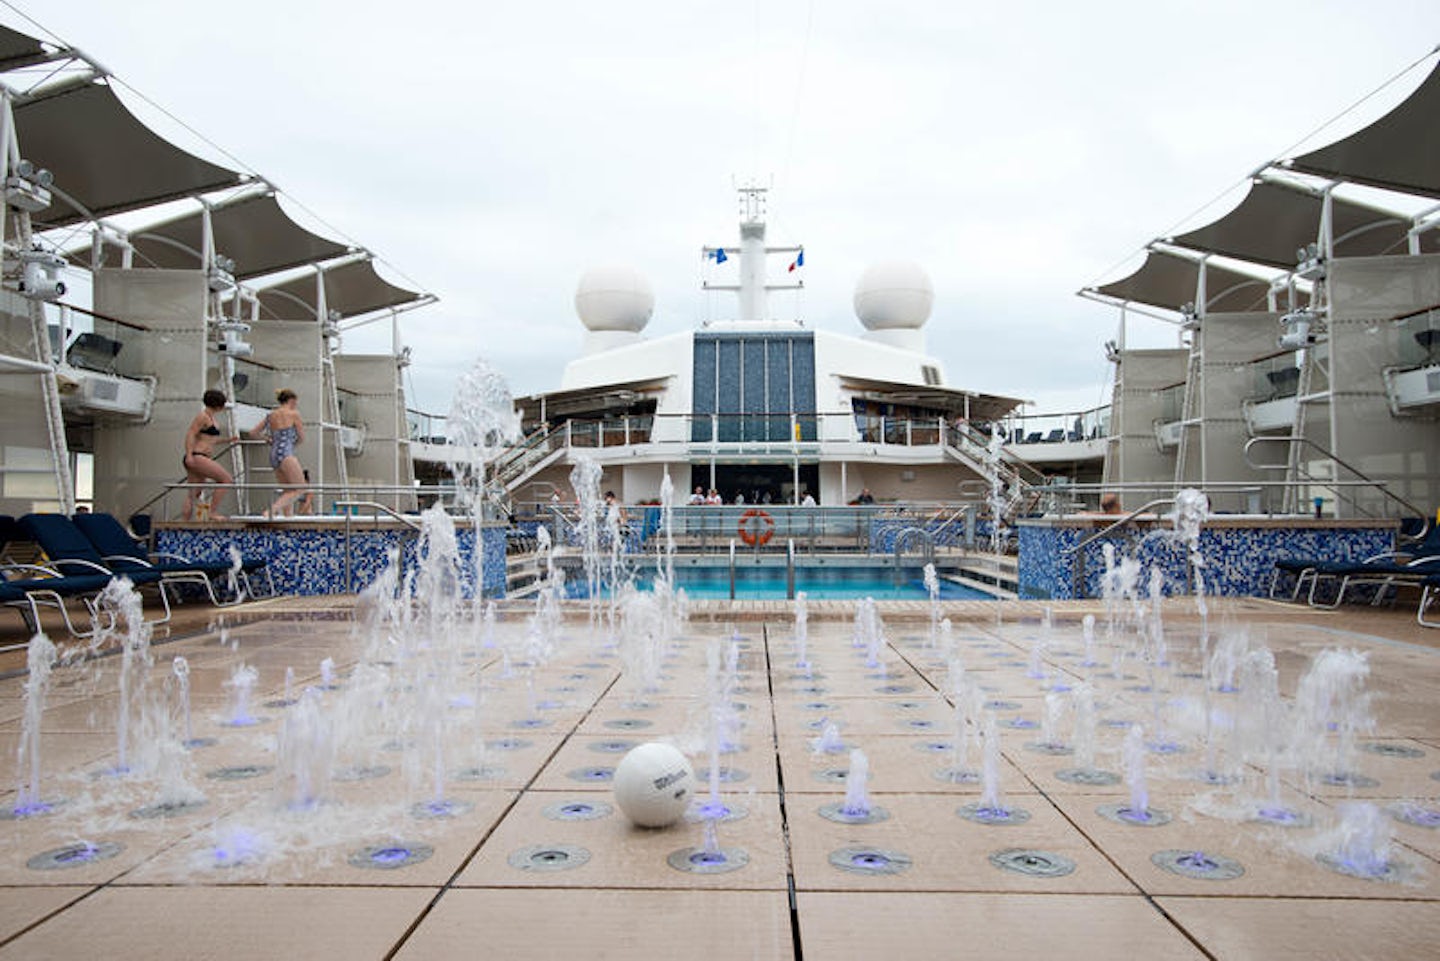 The Fountain on Celebrity Eclipse